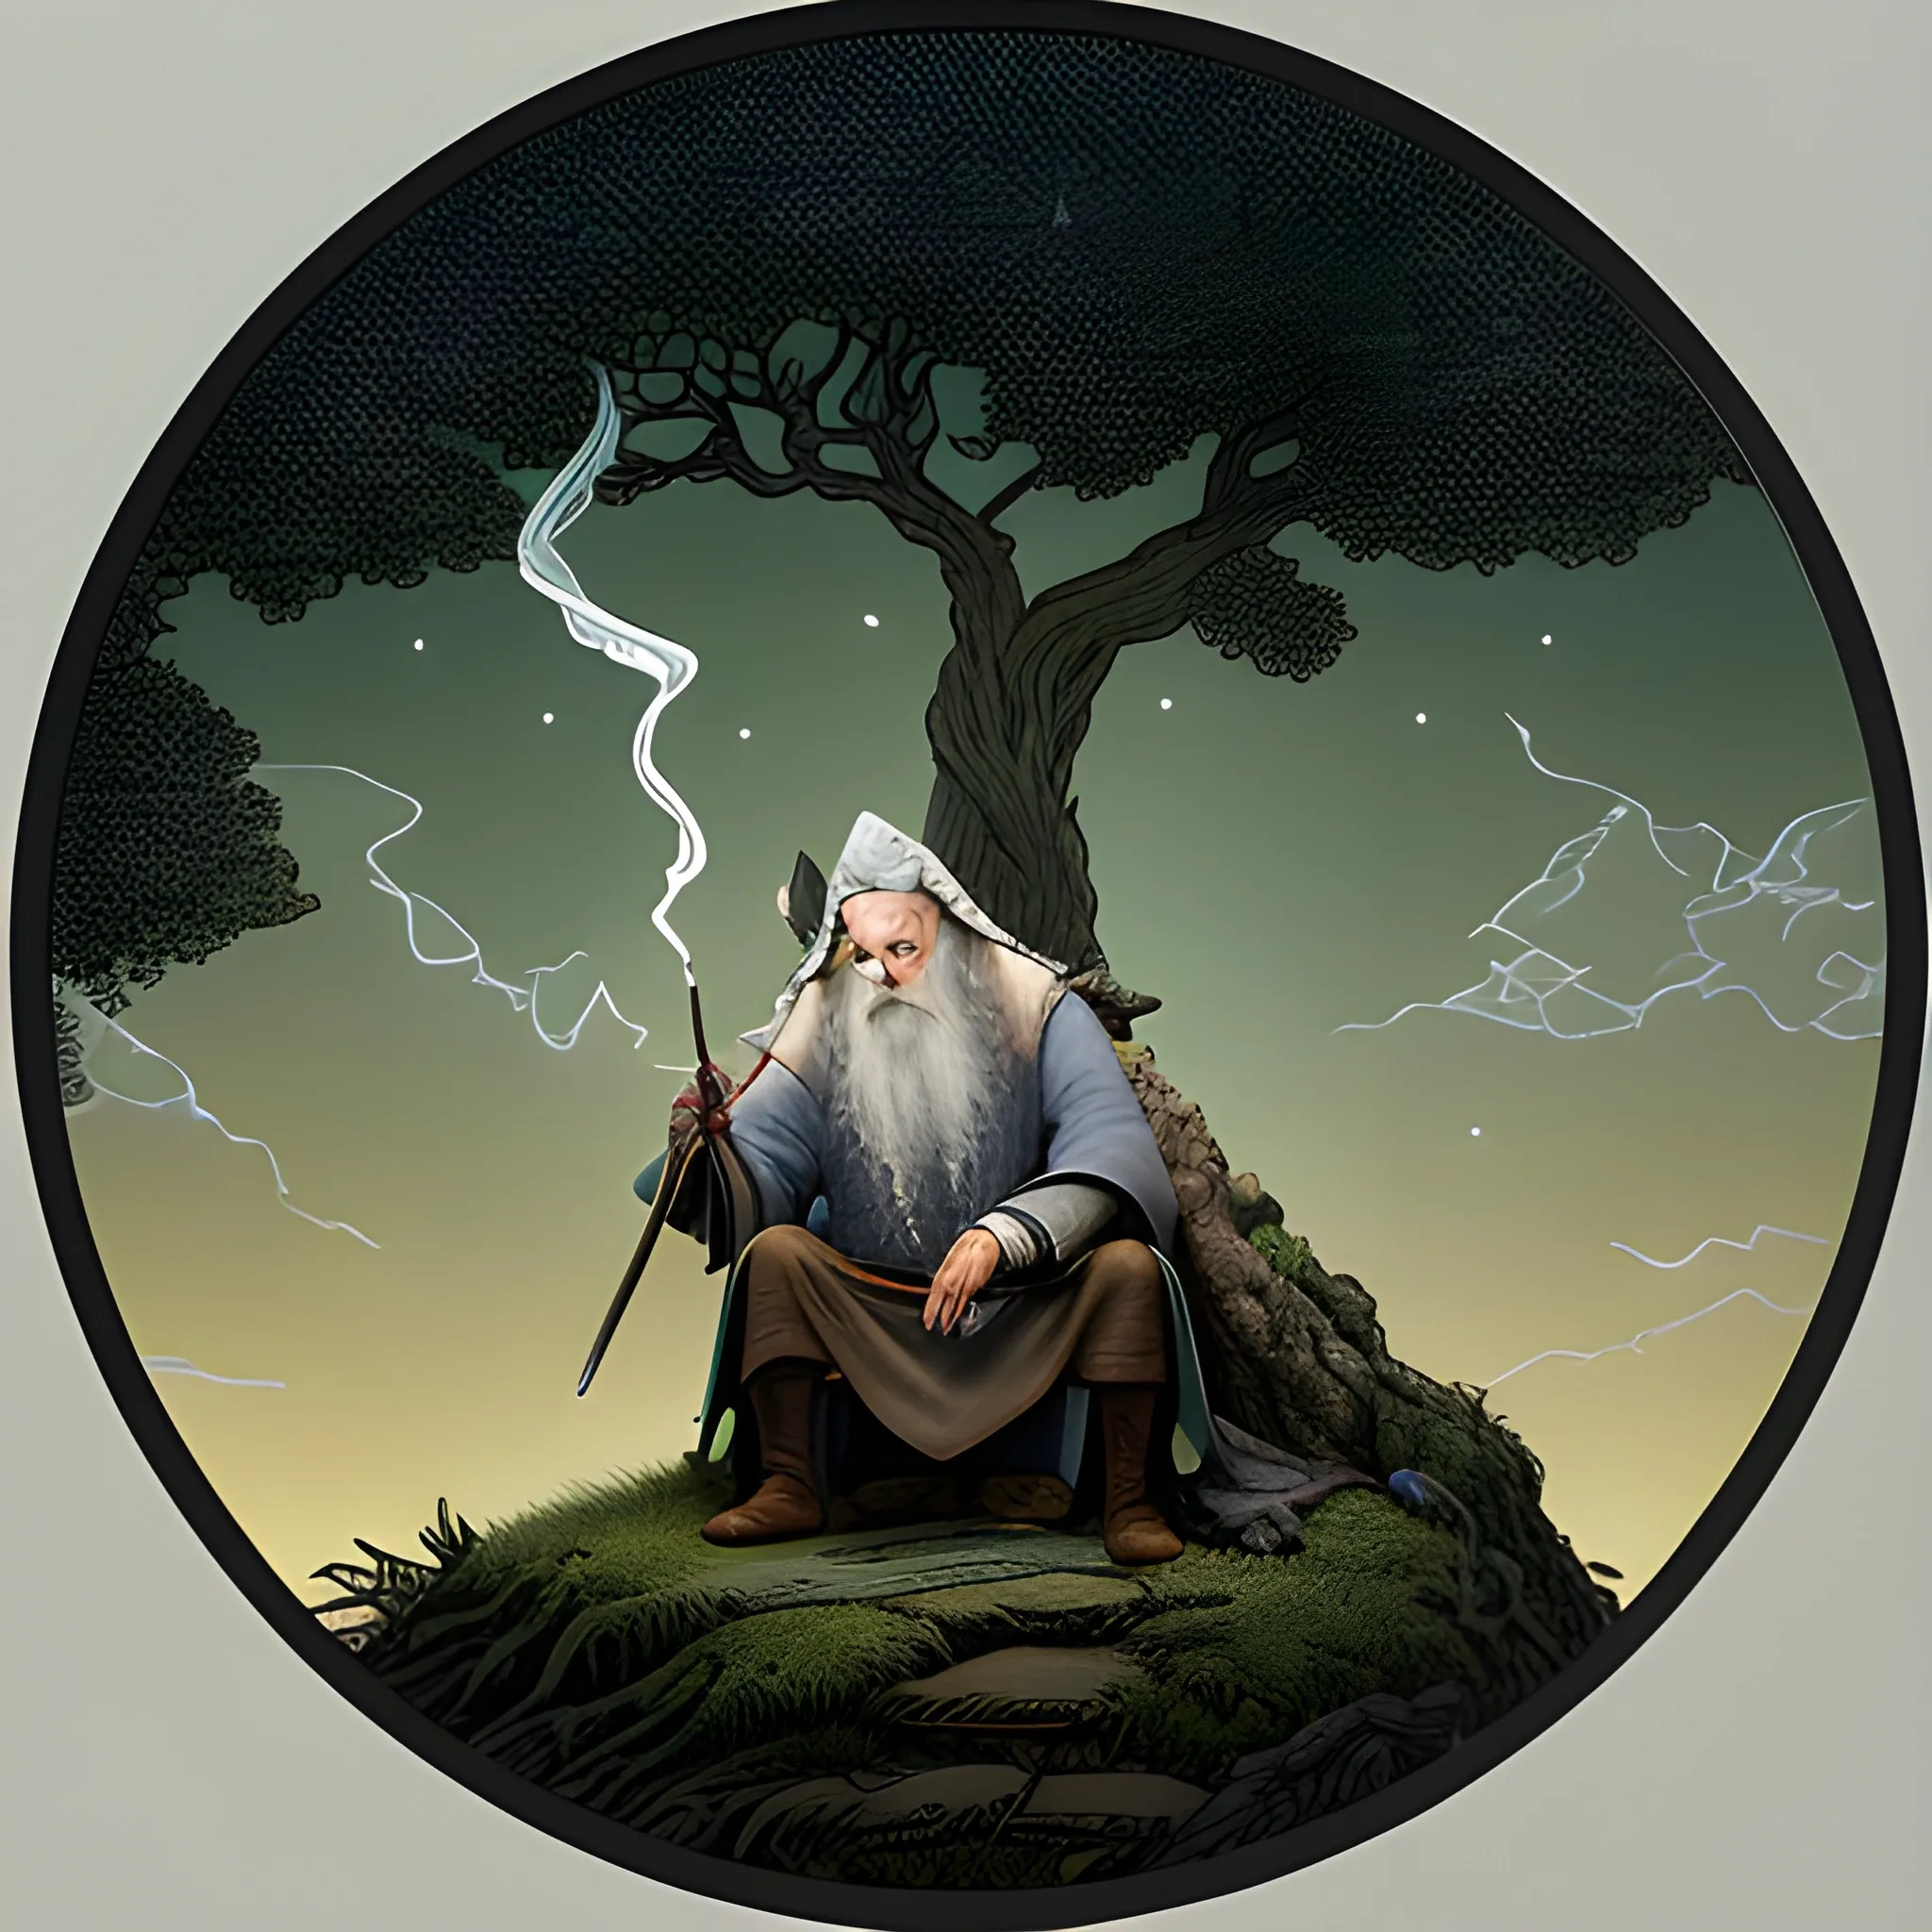 Gandalf standing on the left of frame against an old gnarled tree on a hill looking at the shire at night. He is smoking a pipe as he looks down on the warmly lit hobbit holes in the distance. 